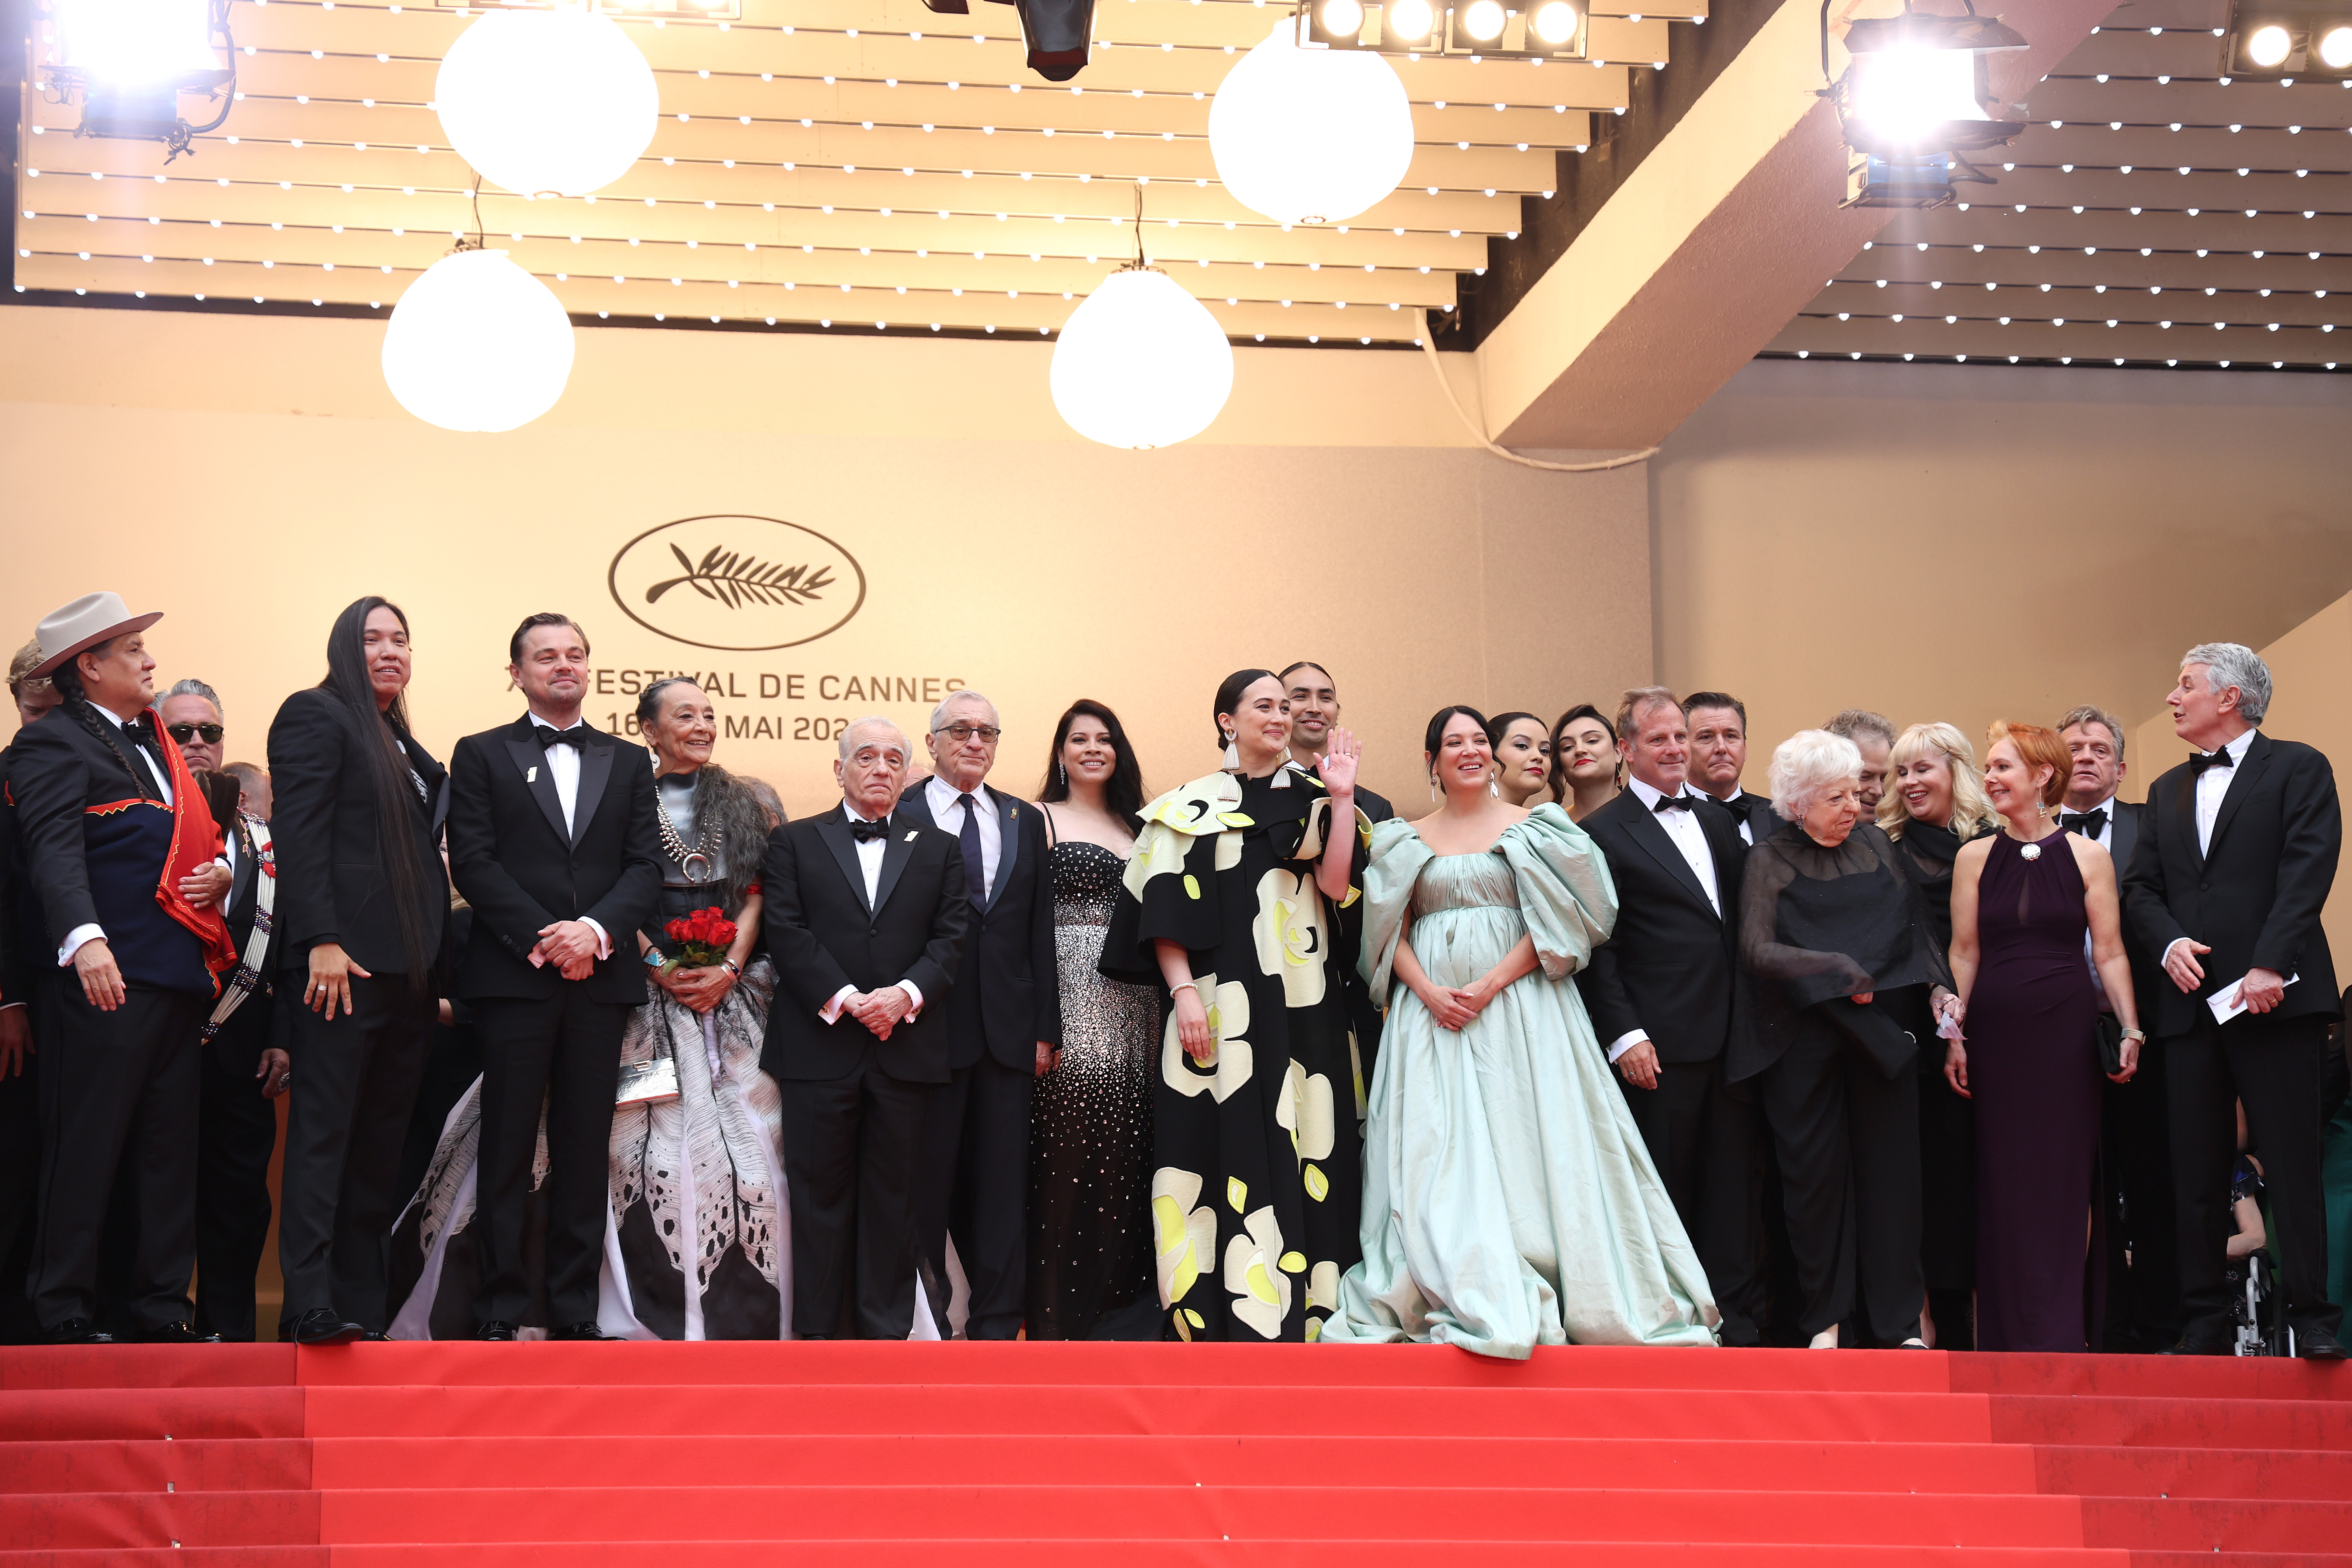  (L to R) Yancey Red Corn, William Belleau, Leonardo DiCaprio, Tantoo Cardinal, Martin Scorsese, Robert De Niro, Cara Jade Myers, Lily Gladstone, Tatanka Means, Jillian Dion, Janae Collins, and guests attend the "Killers Of The Flower Moon" red carpet during the 76th annual Cannes film festival at Palais des Festivals on May 20, 2023 in Cannes, France. 